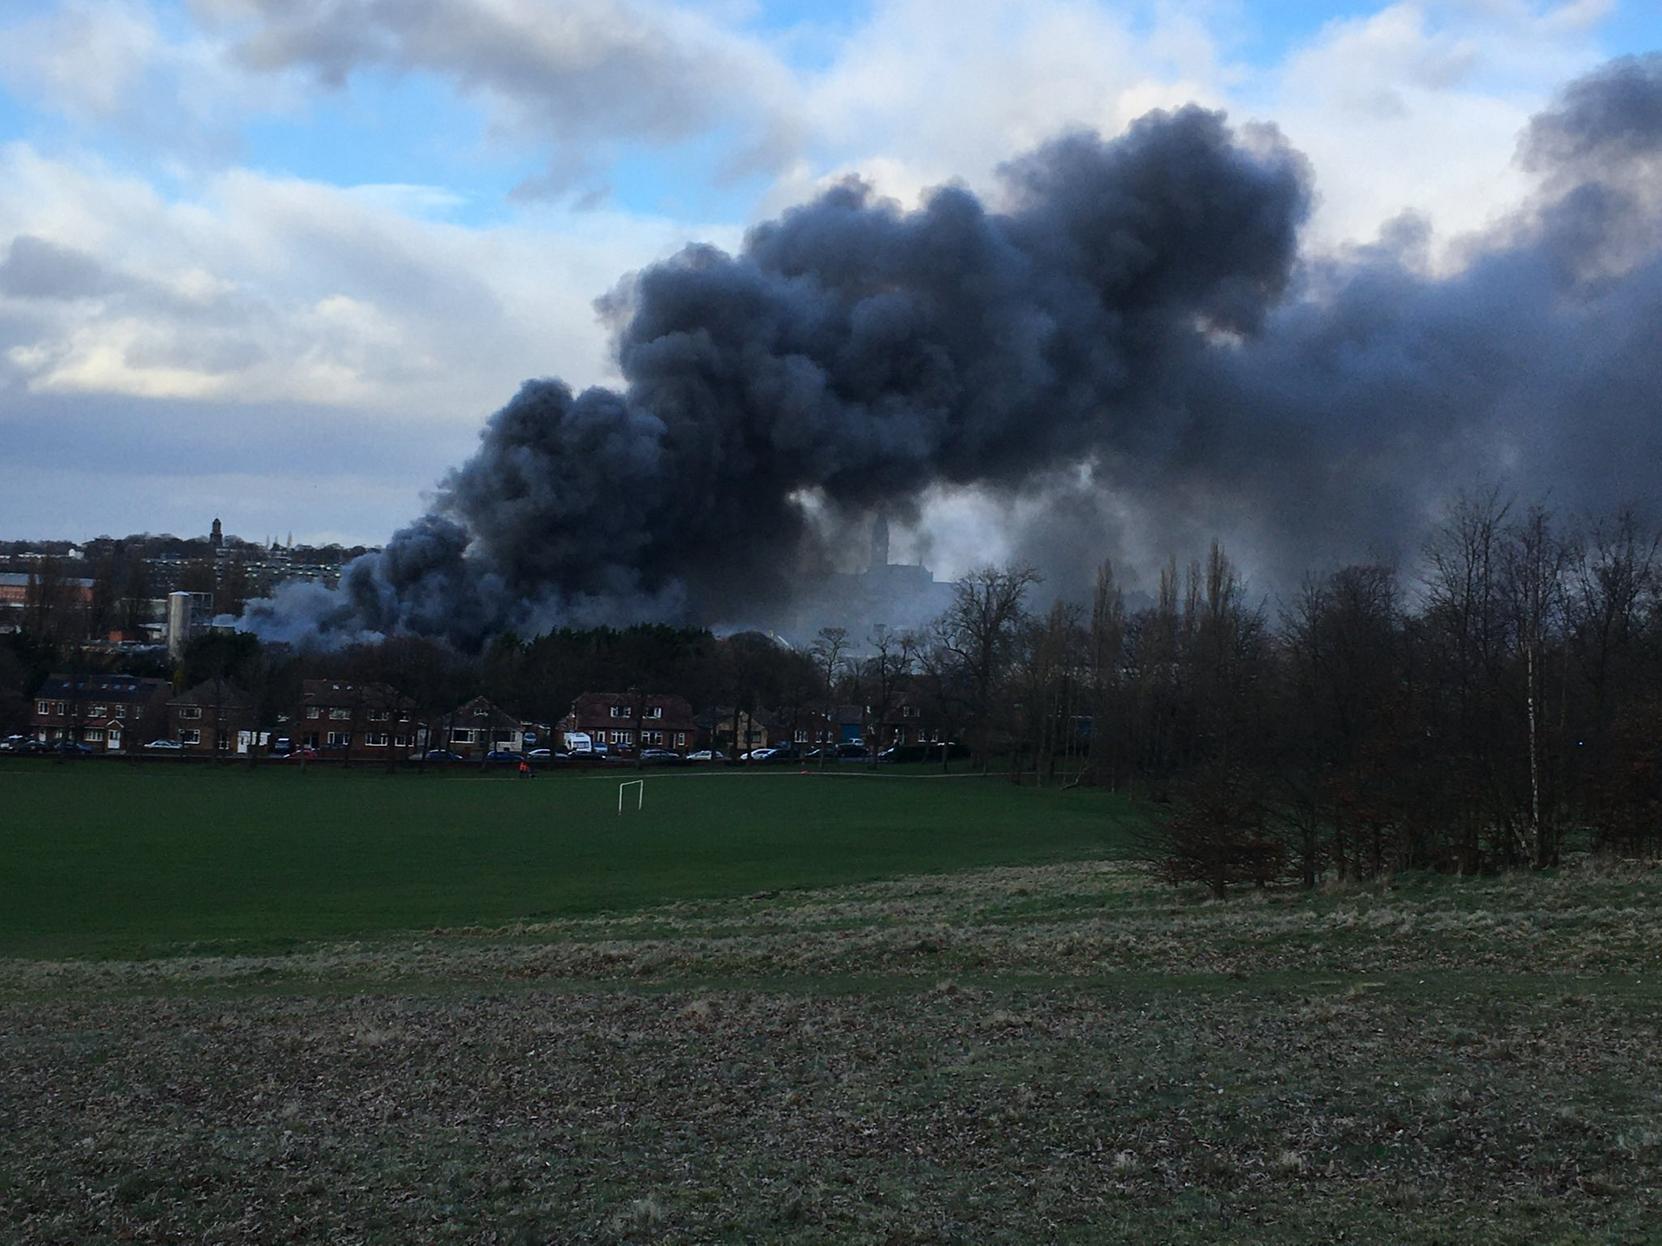 Another shot, captured in Thornes Park, shows smoke rising above the city.